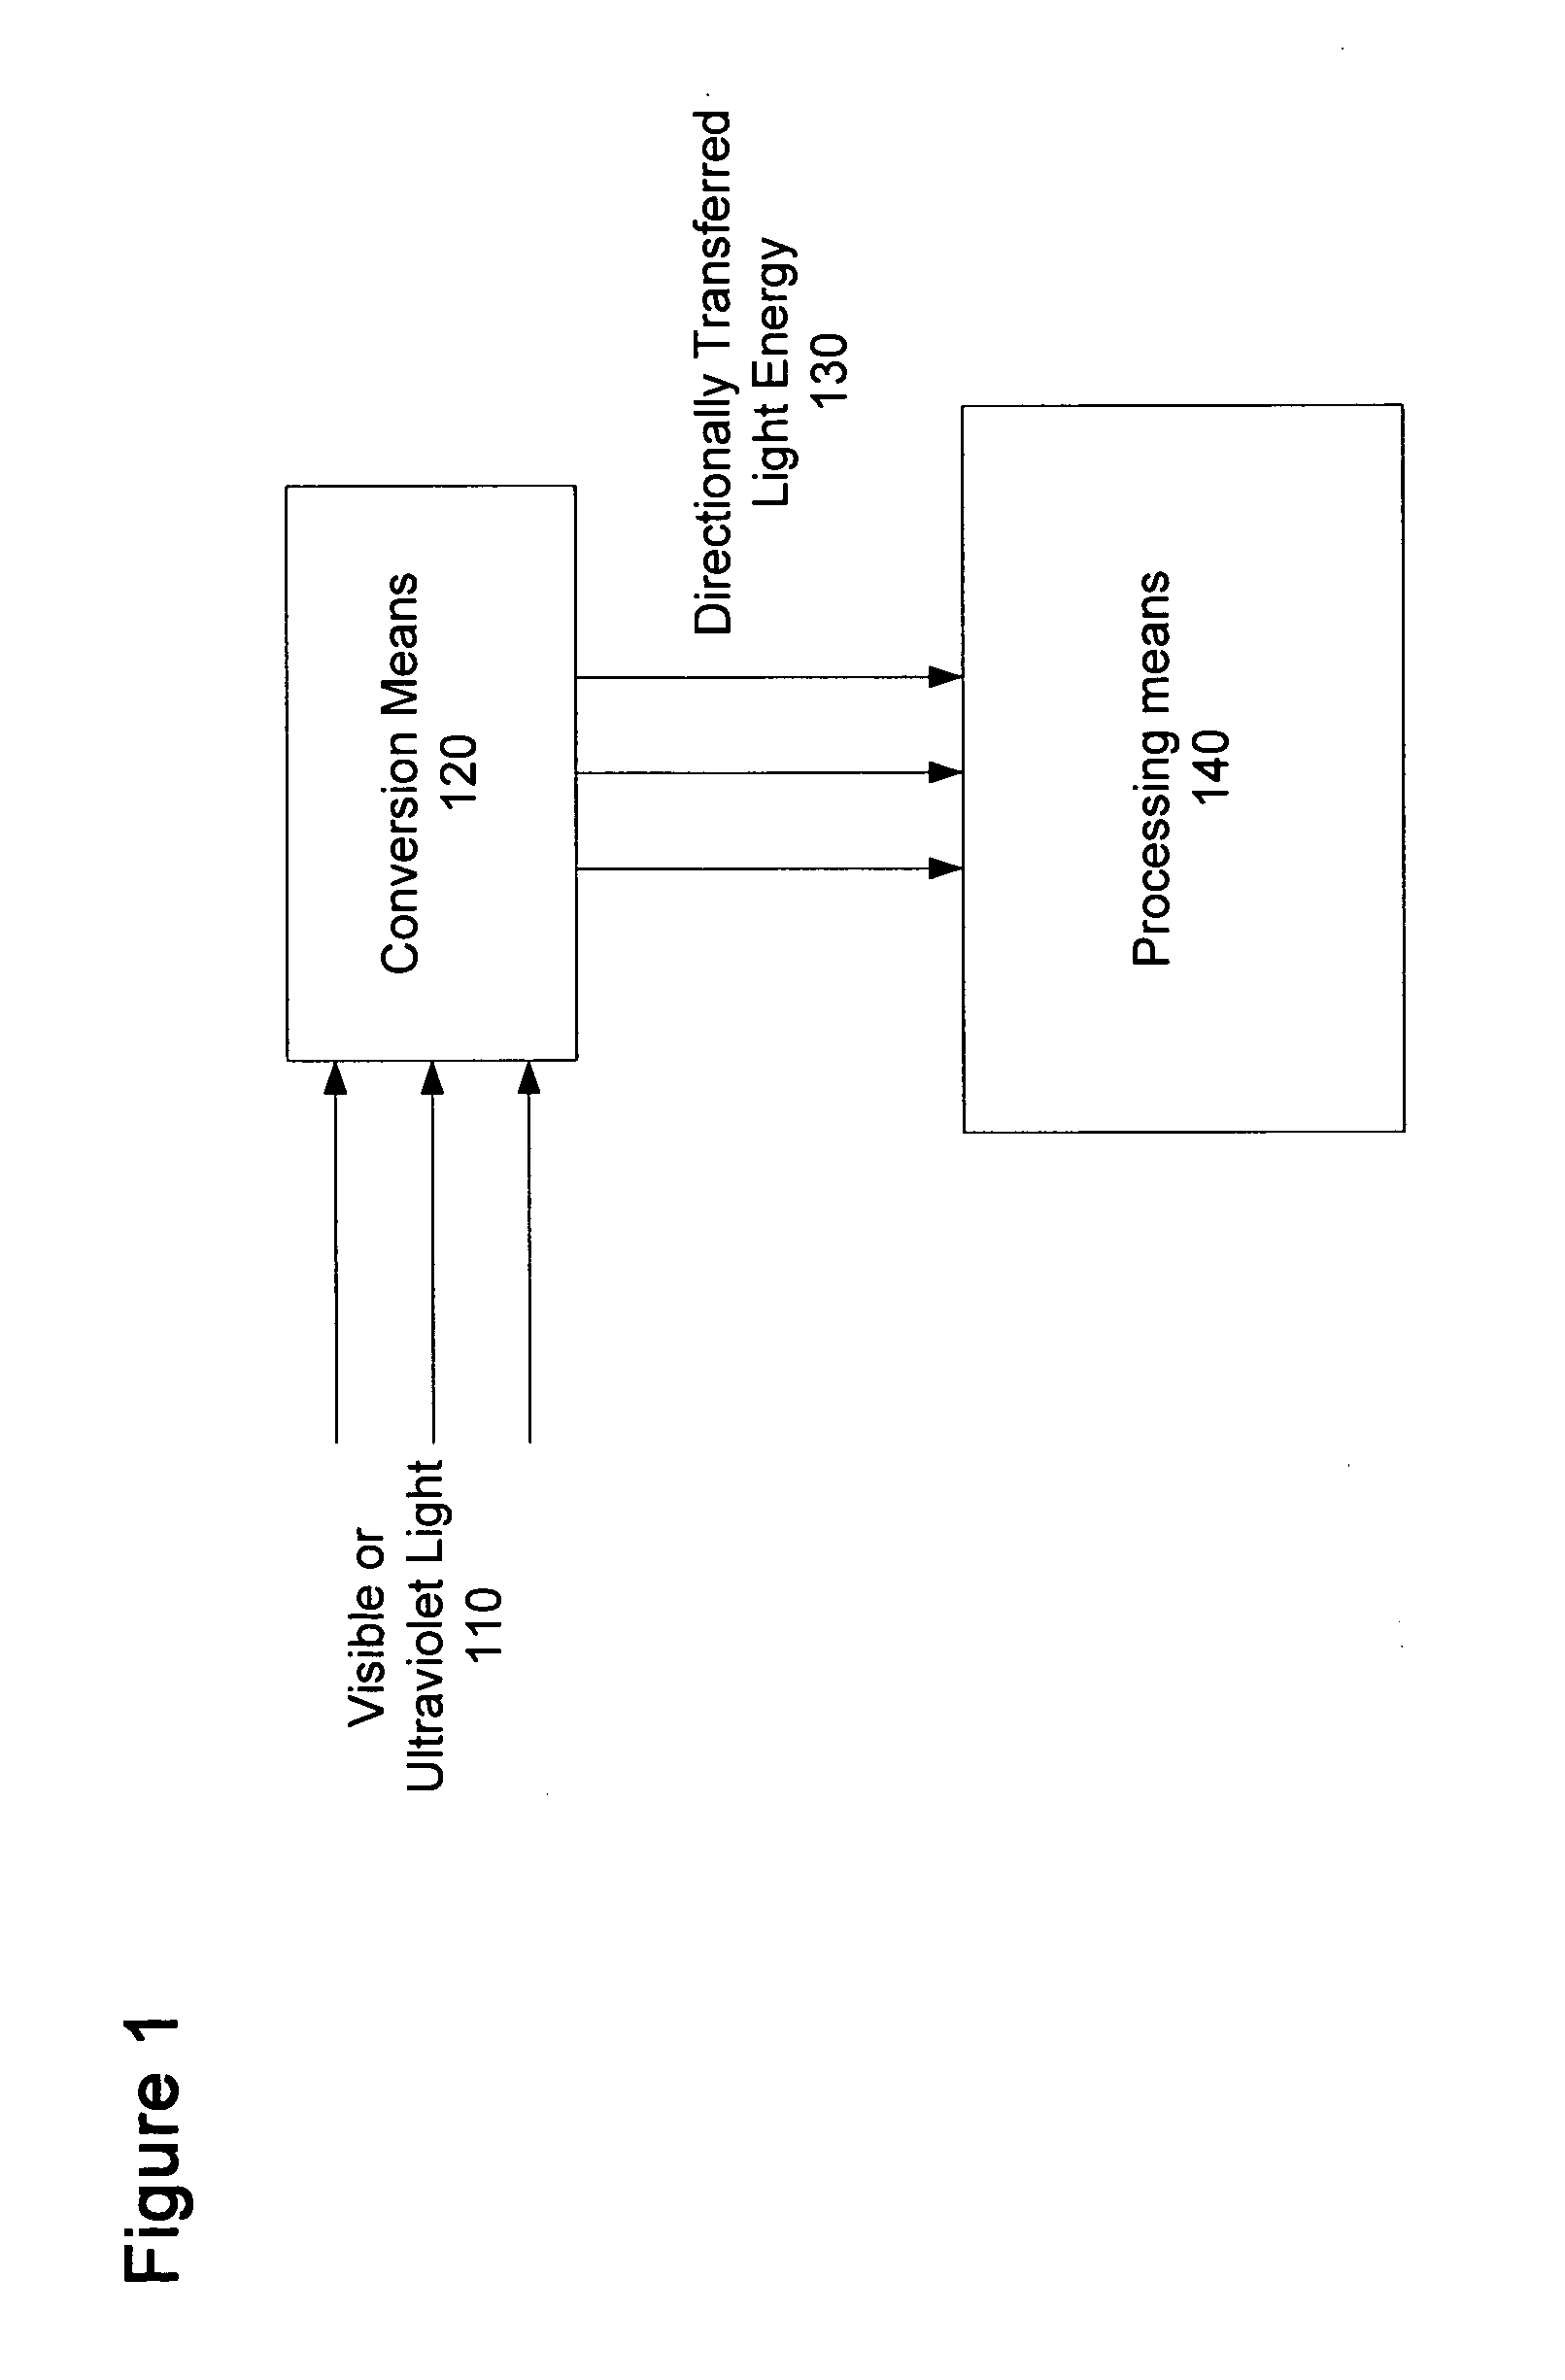 Signal processing devices comprising biological and bio-mimetic components